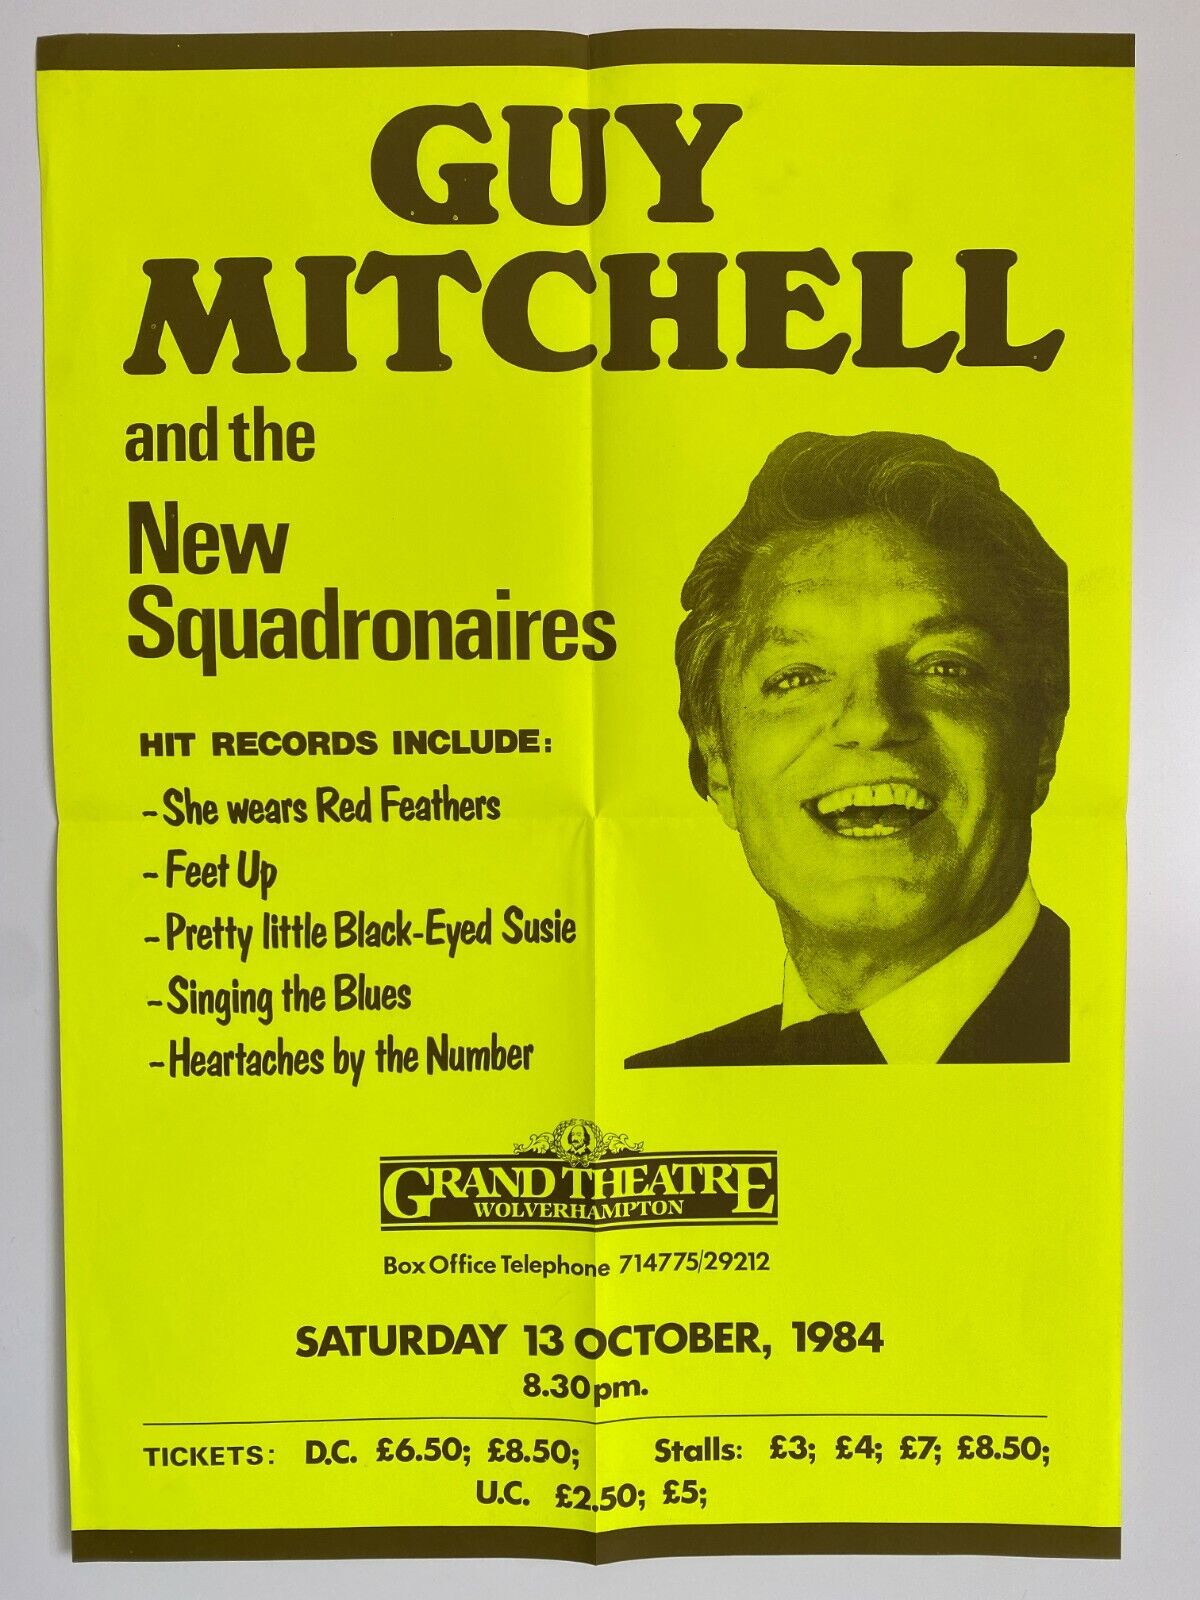 Guy Mitchell and the New Squadronaires 1984 Wolverhampton Large Poster - GC